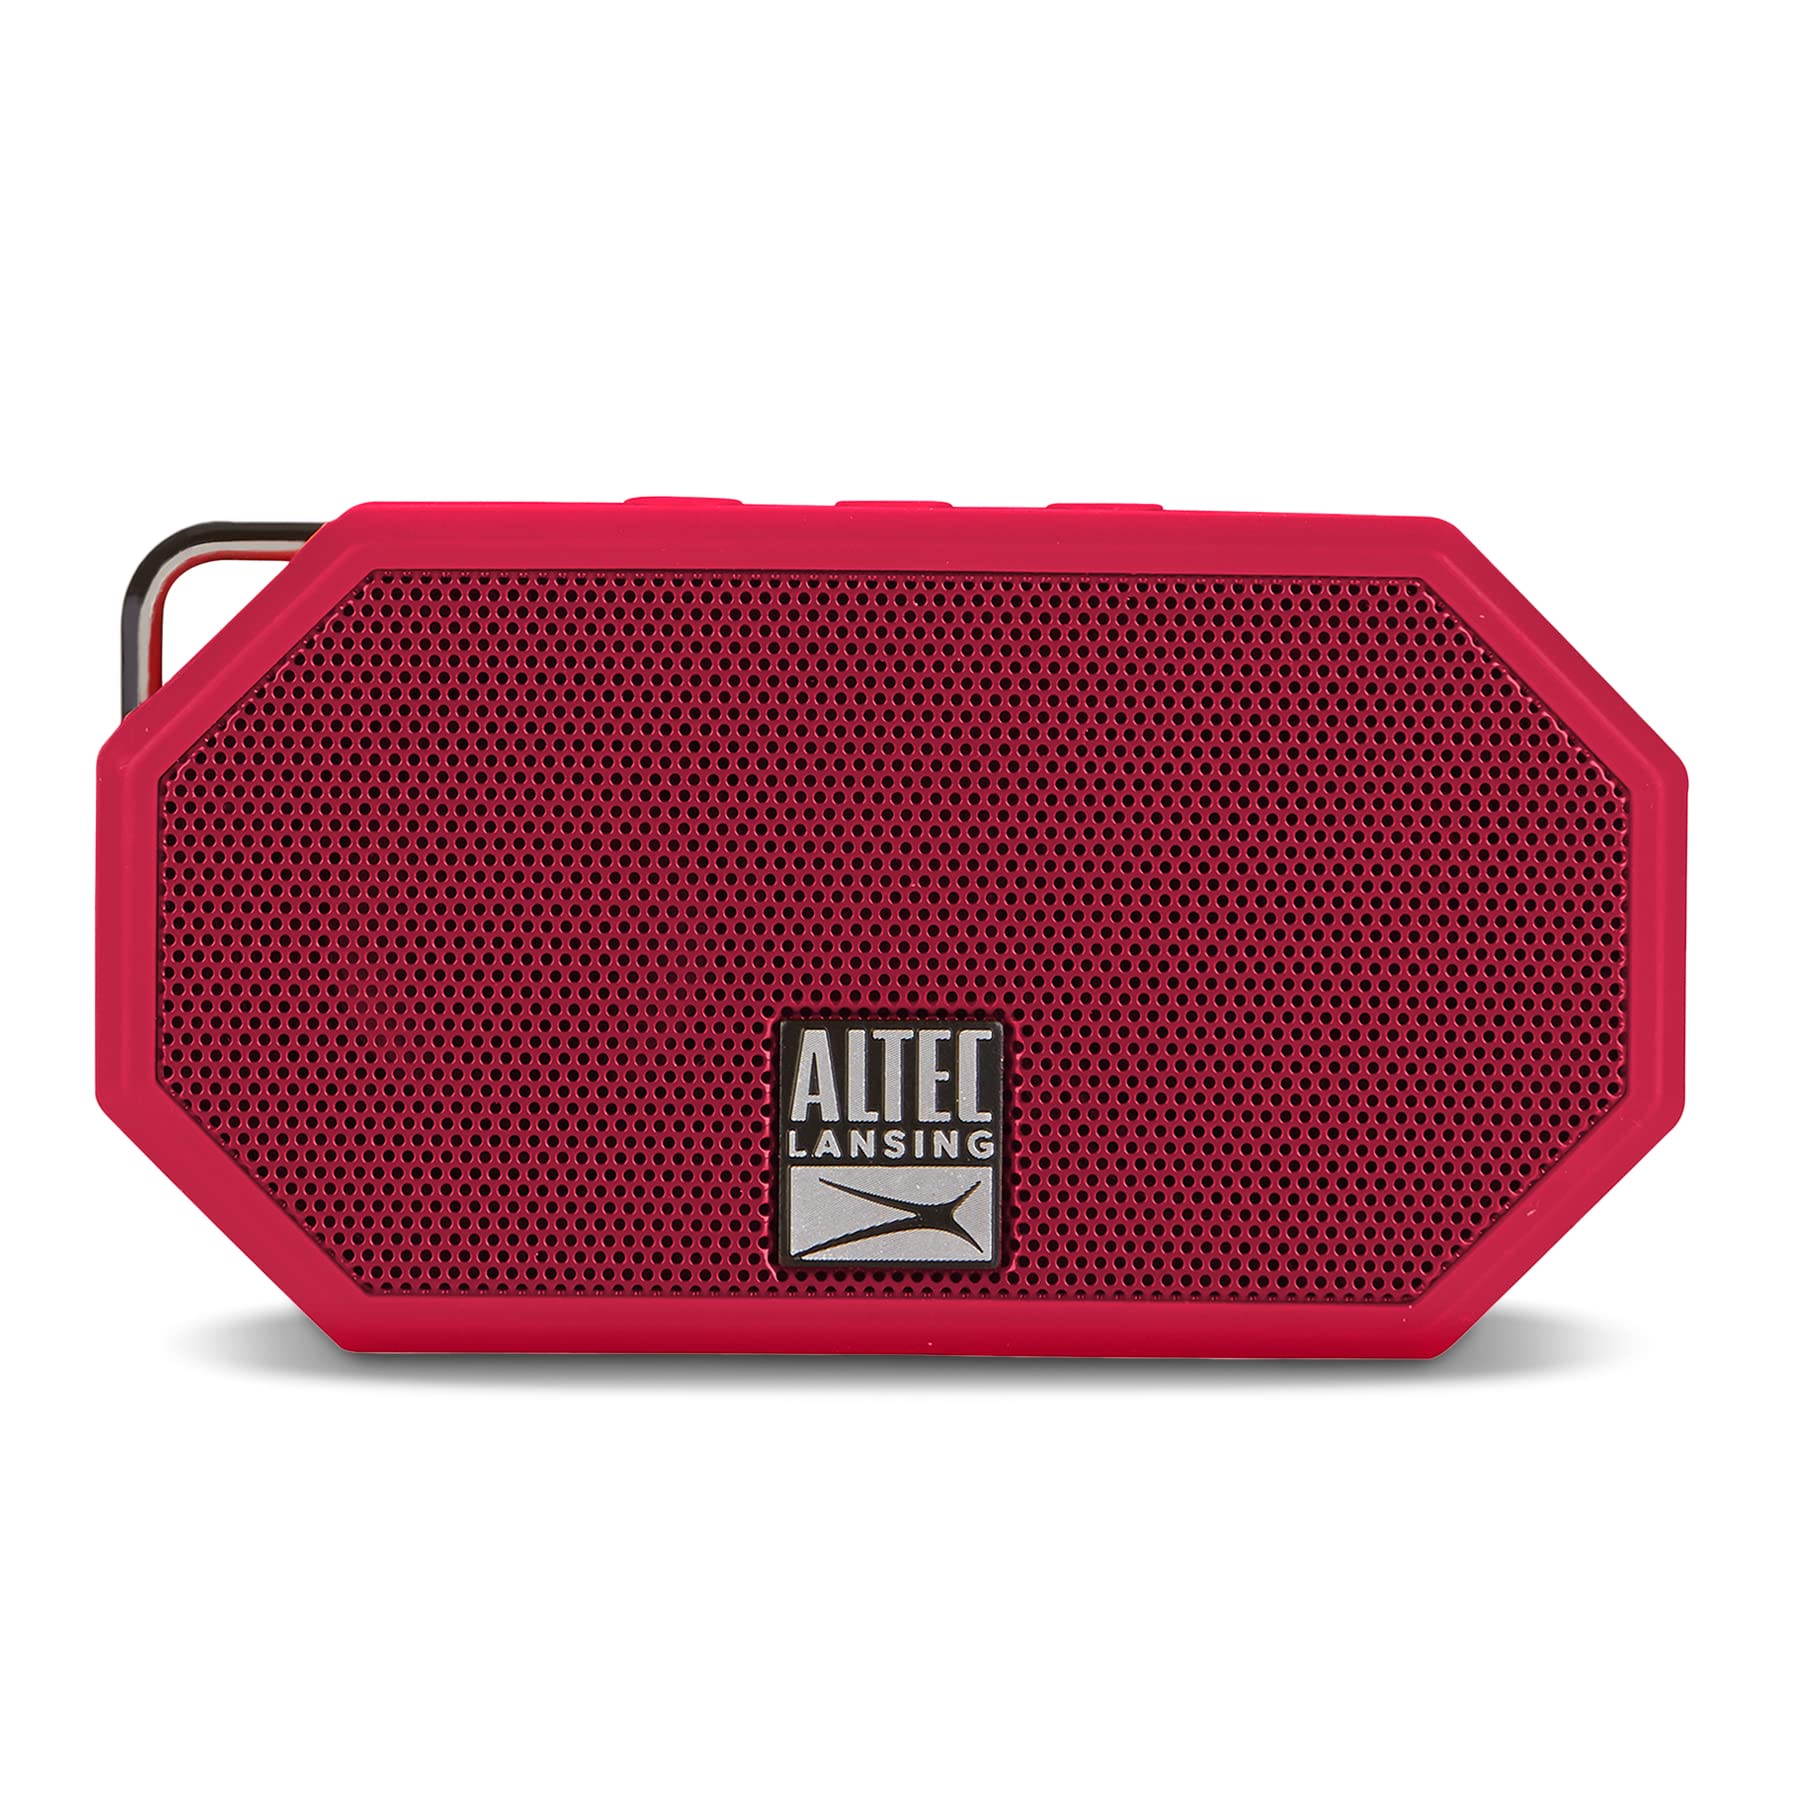 Altec Lansing Mini H2O - Waterproof Bluetooth Speaker, IP67 Certified & Floats in Water, Compact & Portable Speaker for Hiking, Camping, Pool, and Beach, Red